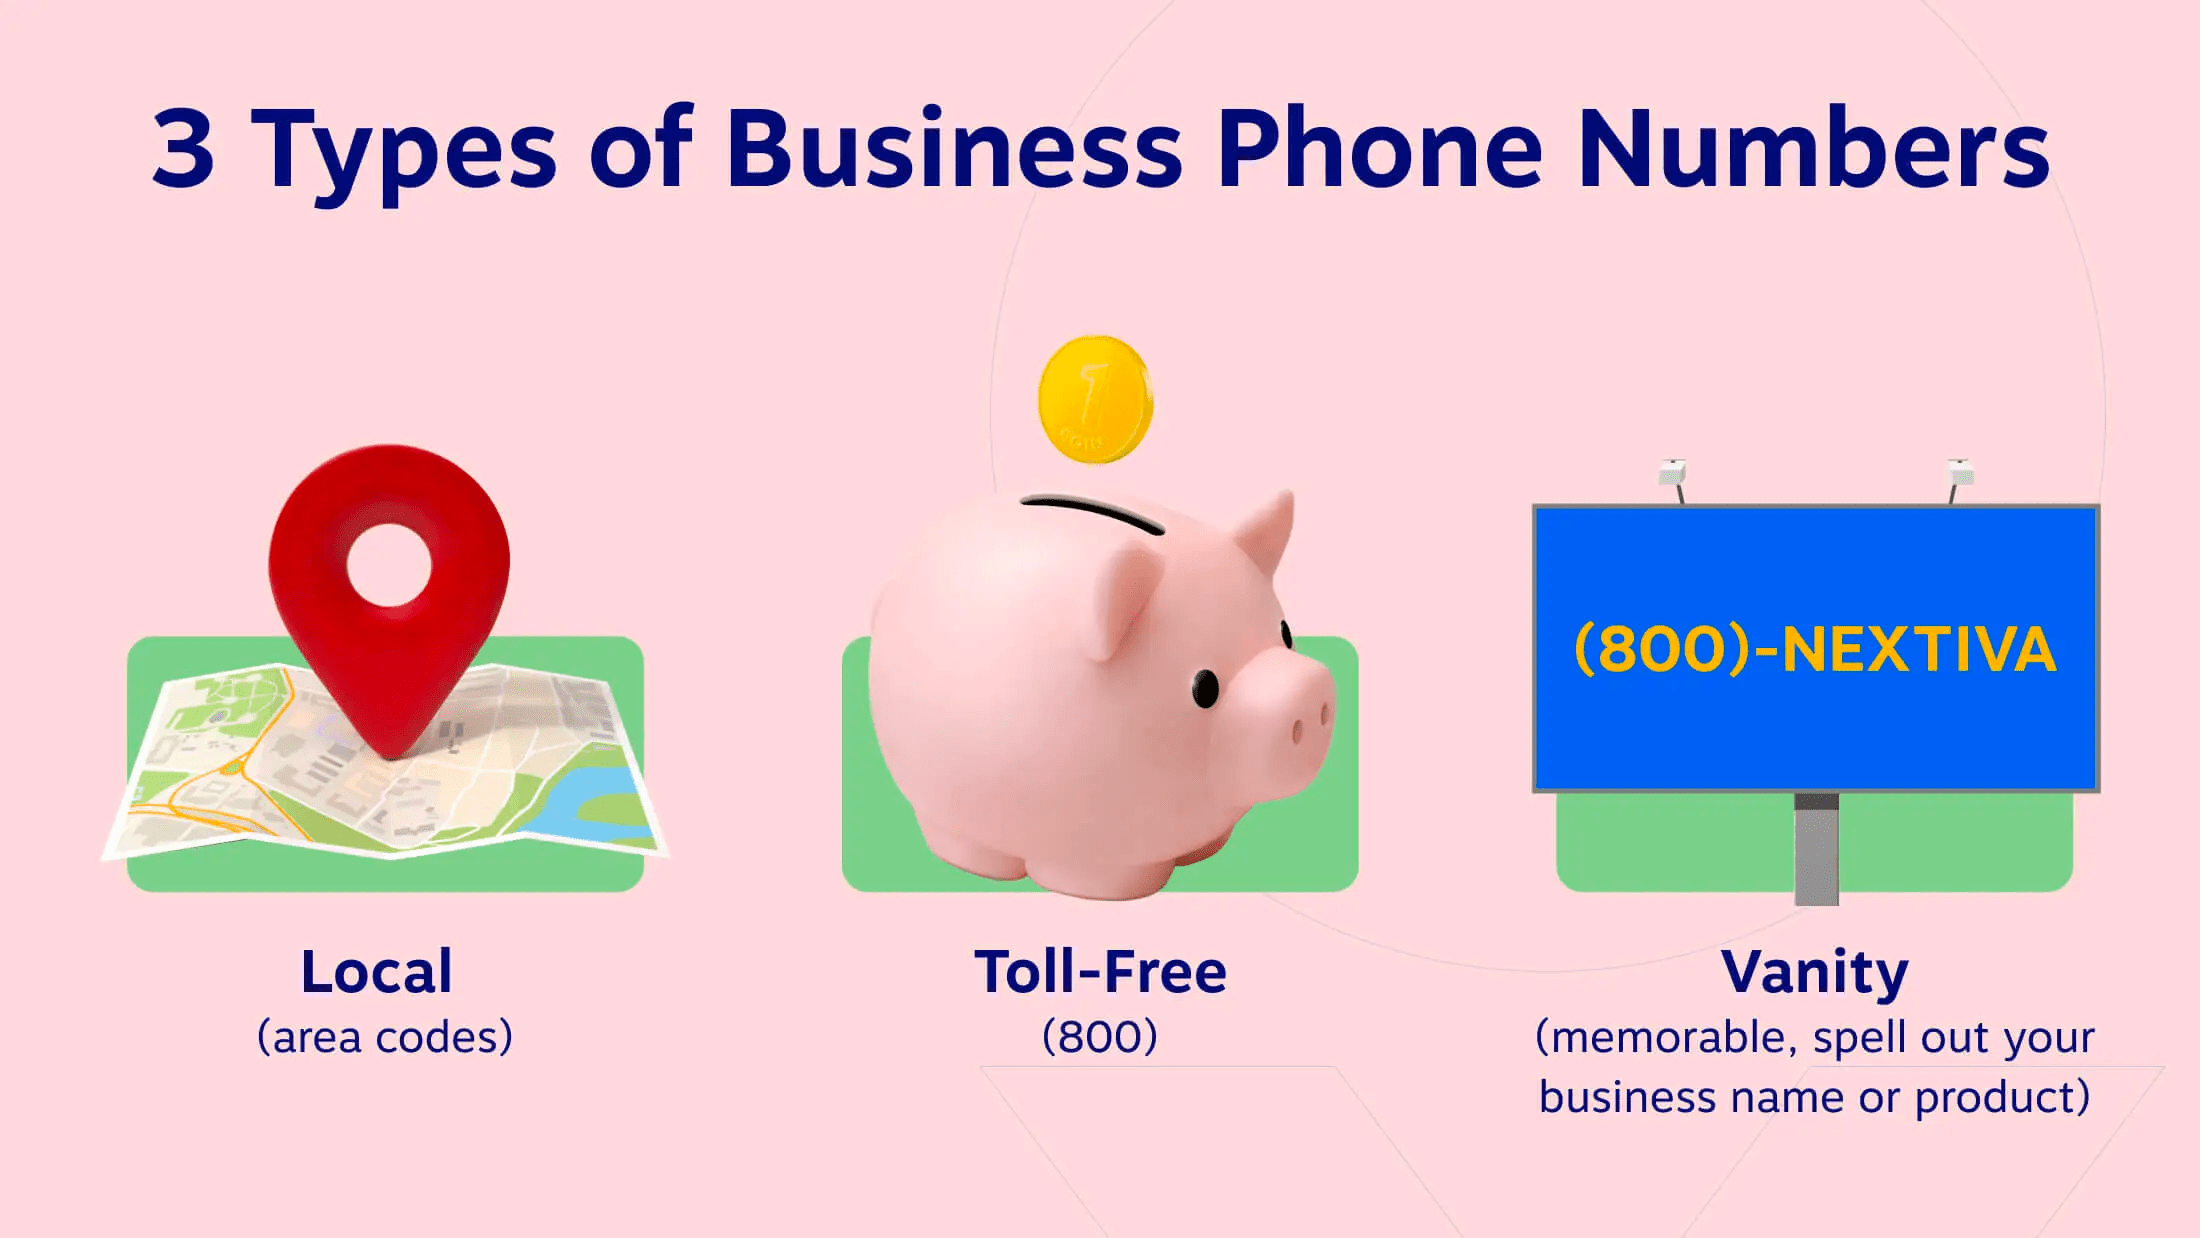 Types of business phone numbers